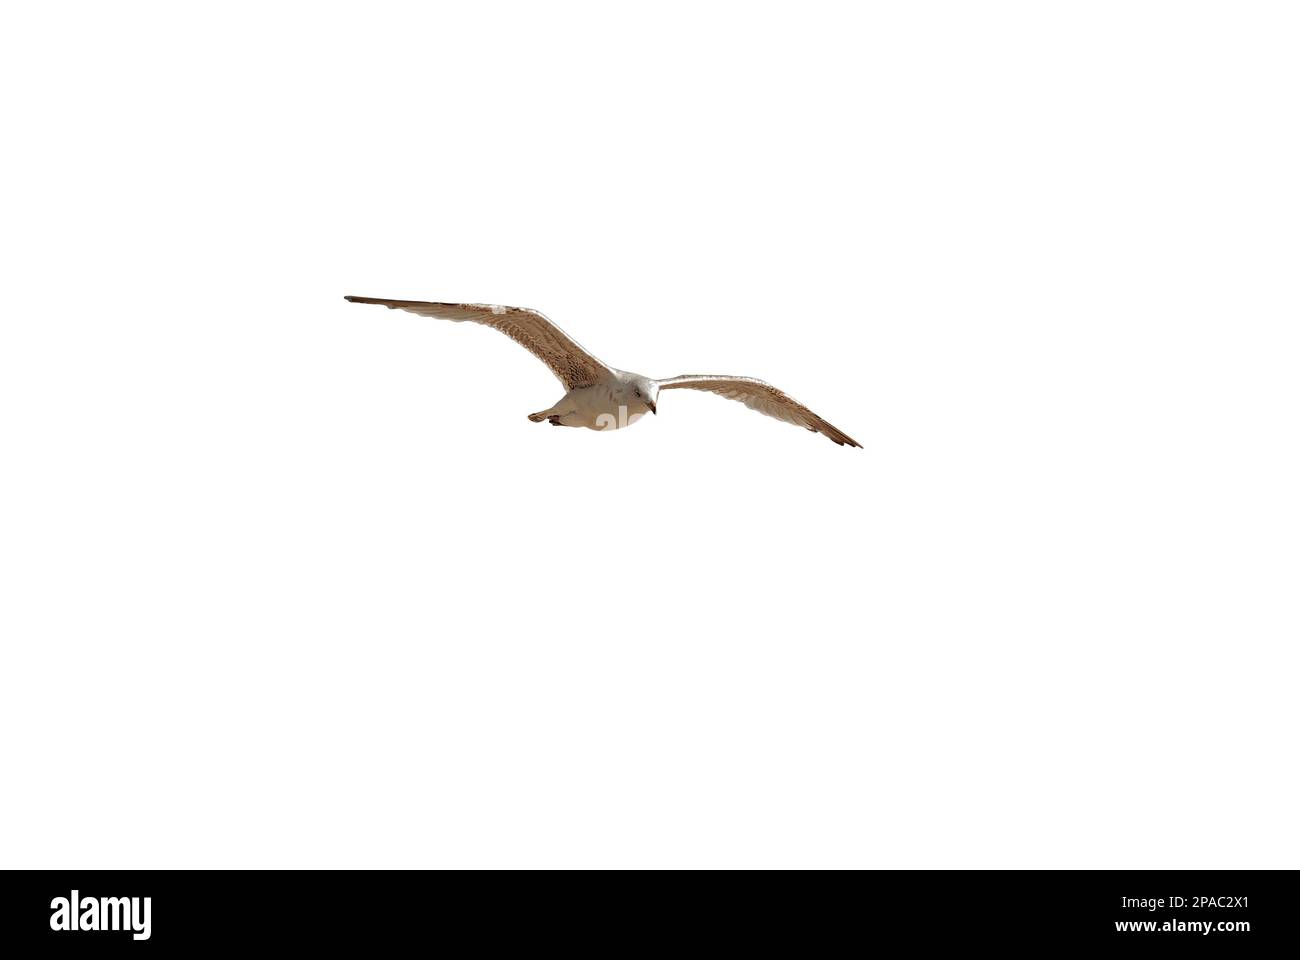 the flight of the seagulls - seagull in flight isolated on white background Stock Photo